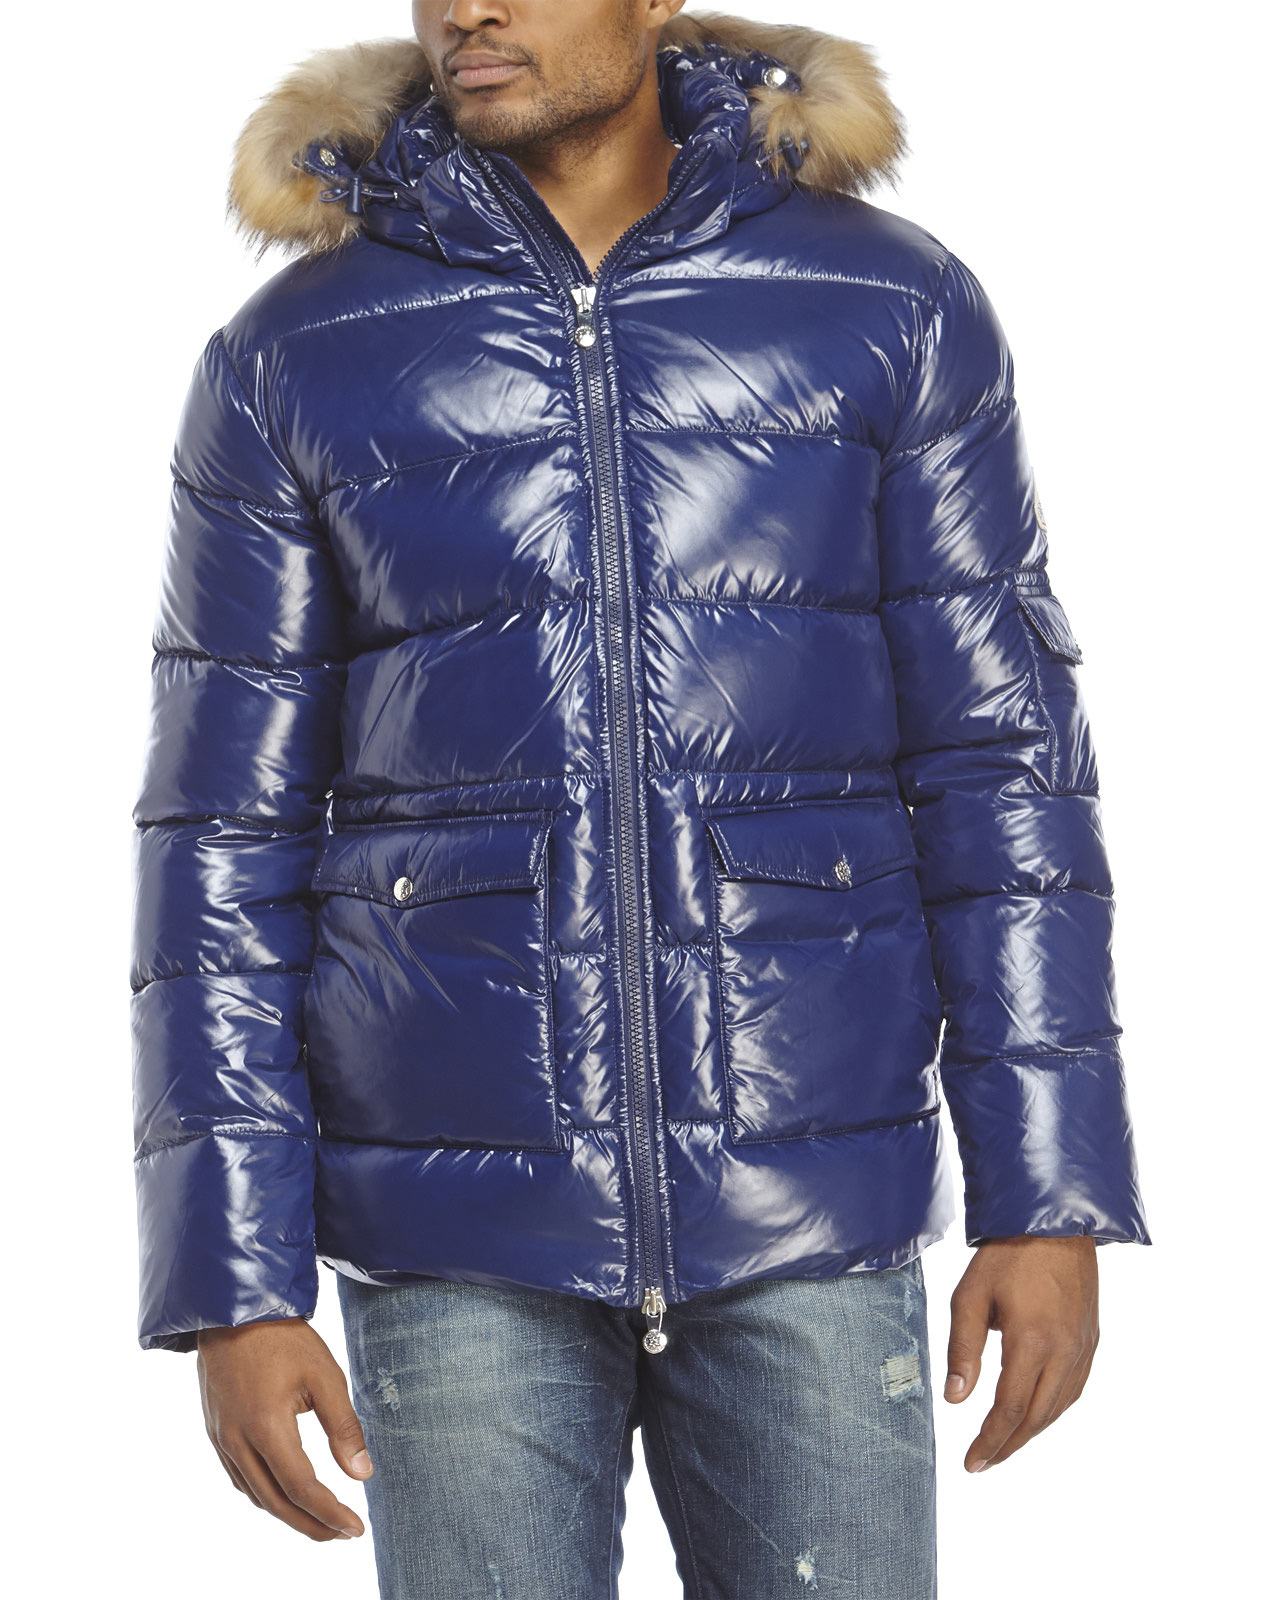 Lyst - Pyrenex Real Fur Authentic Shiny Down Jacket in Blue for Men